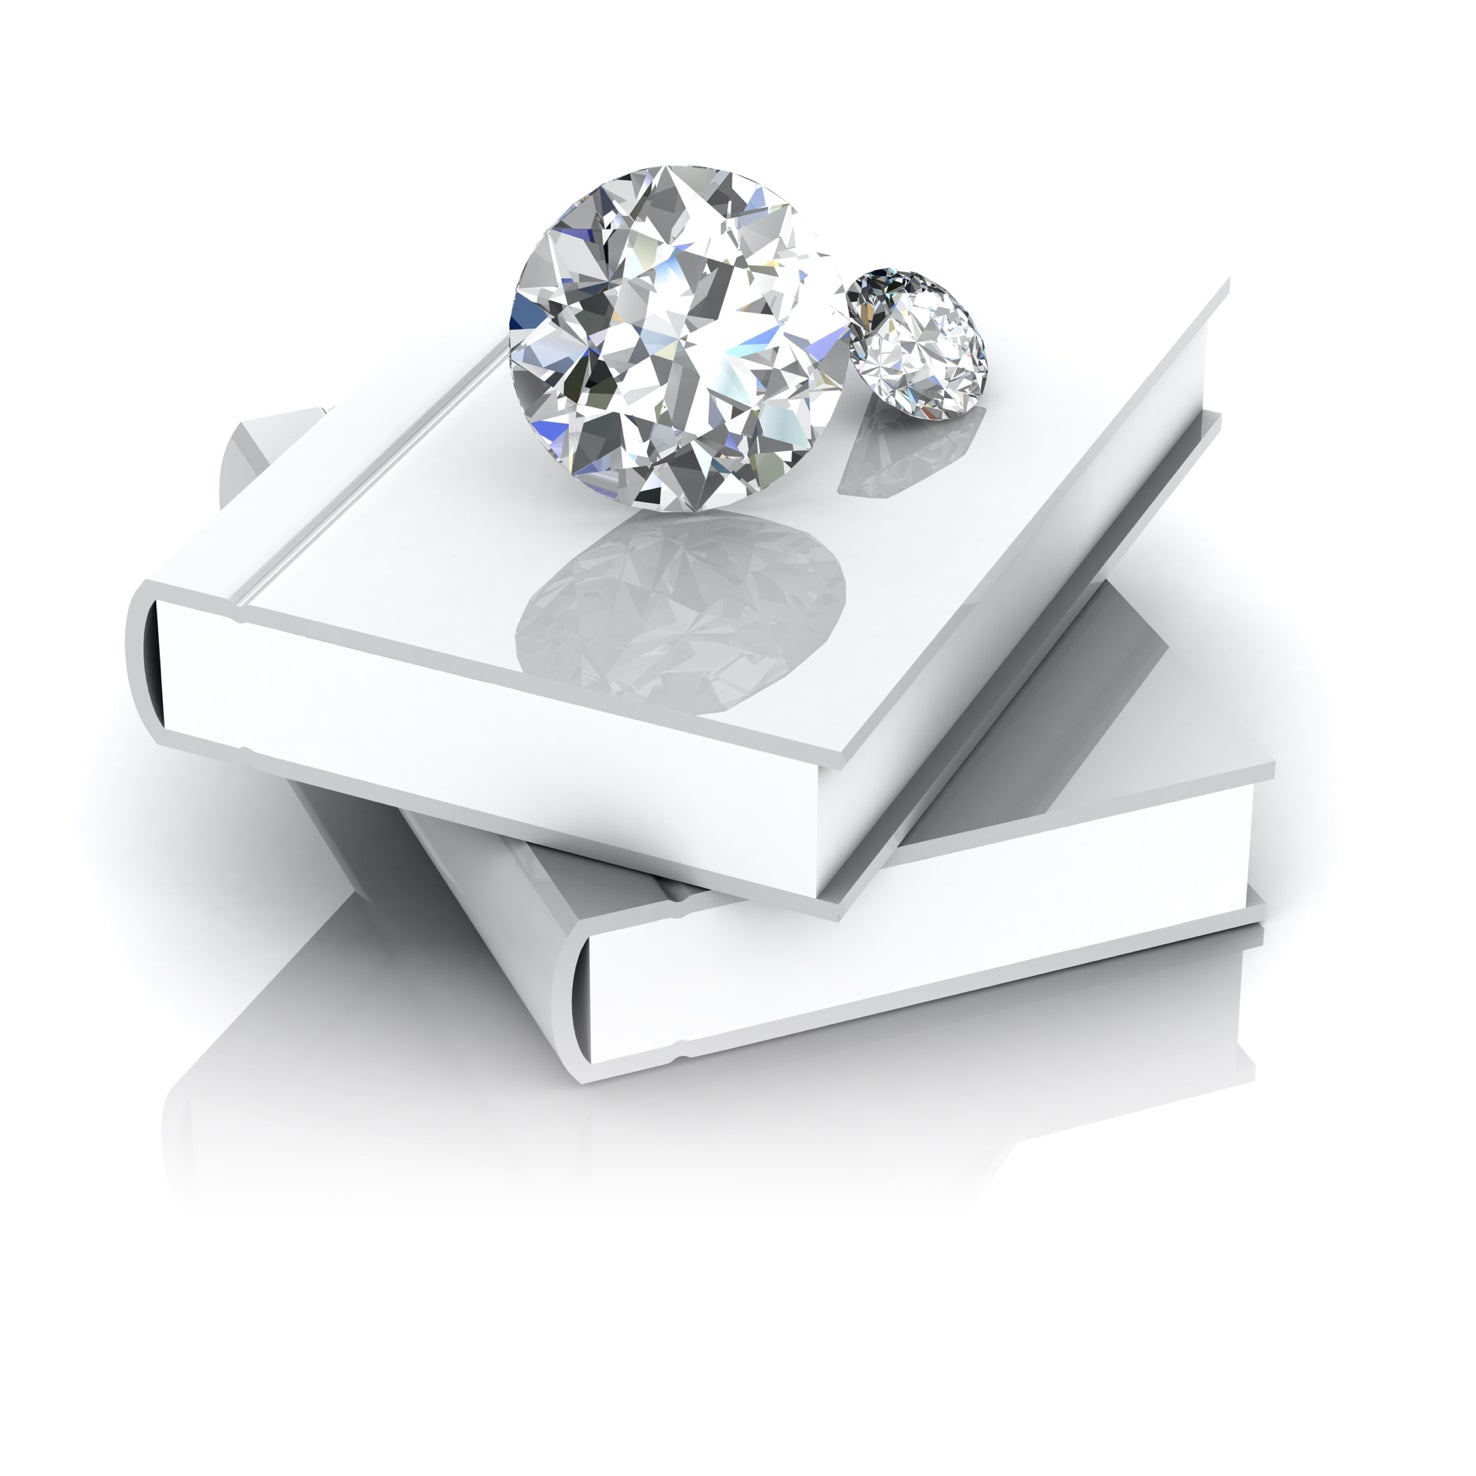 Engagement Ring Education- Learn about the 4 C's of diamonds